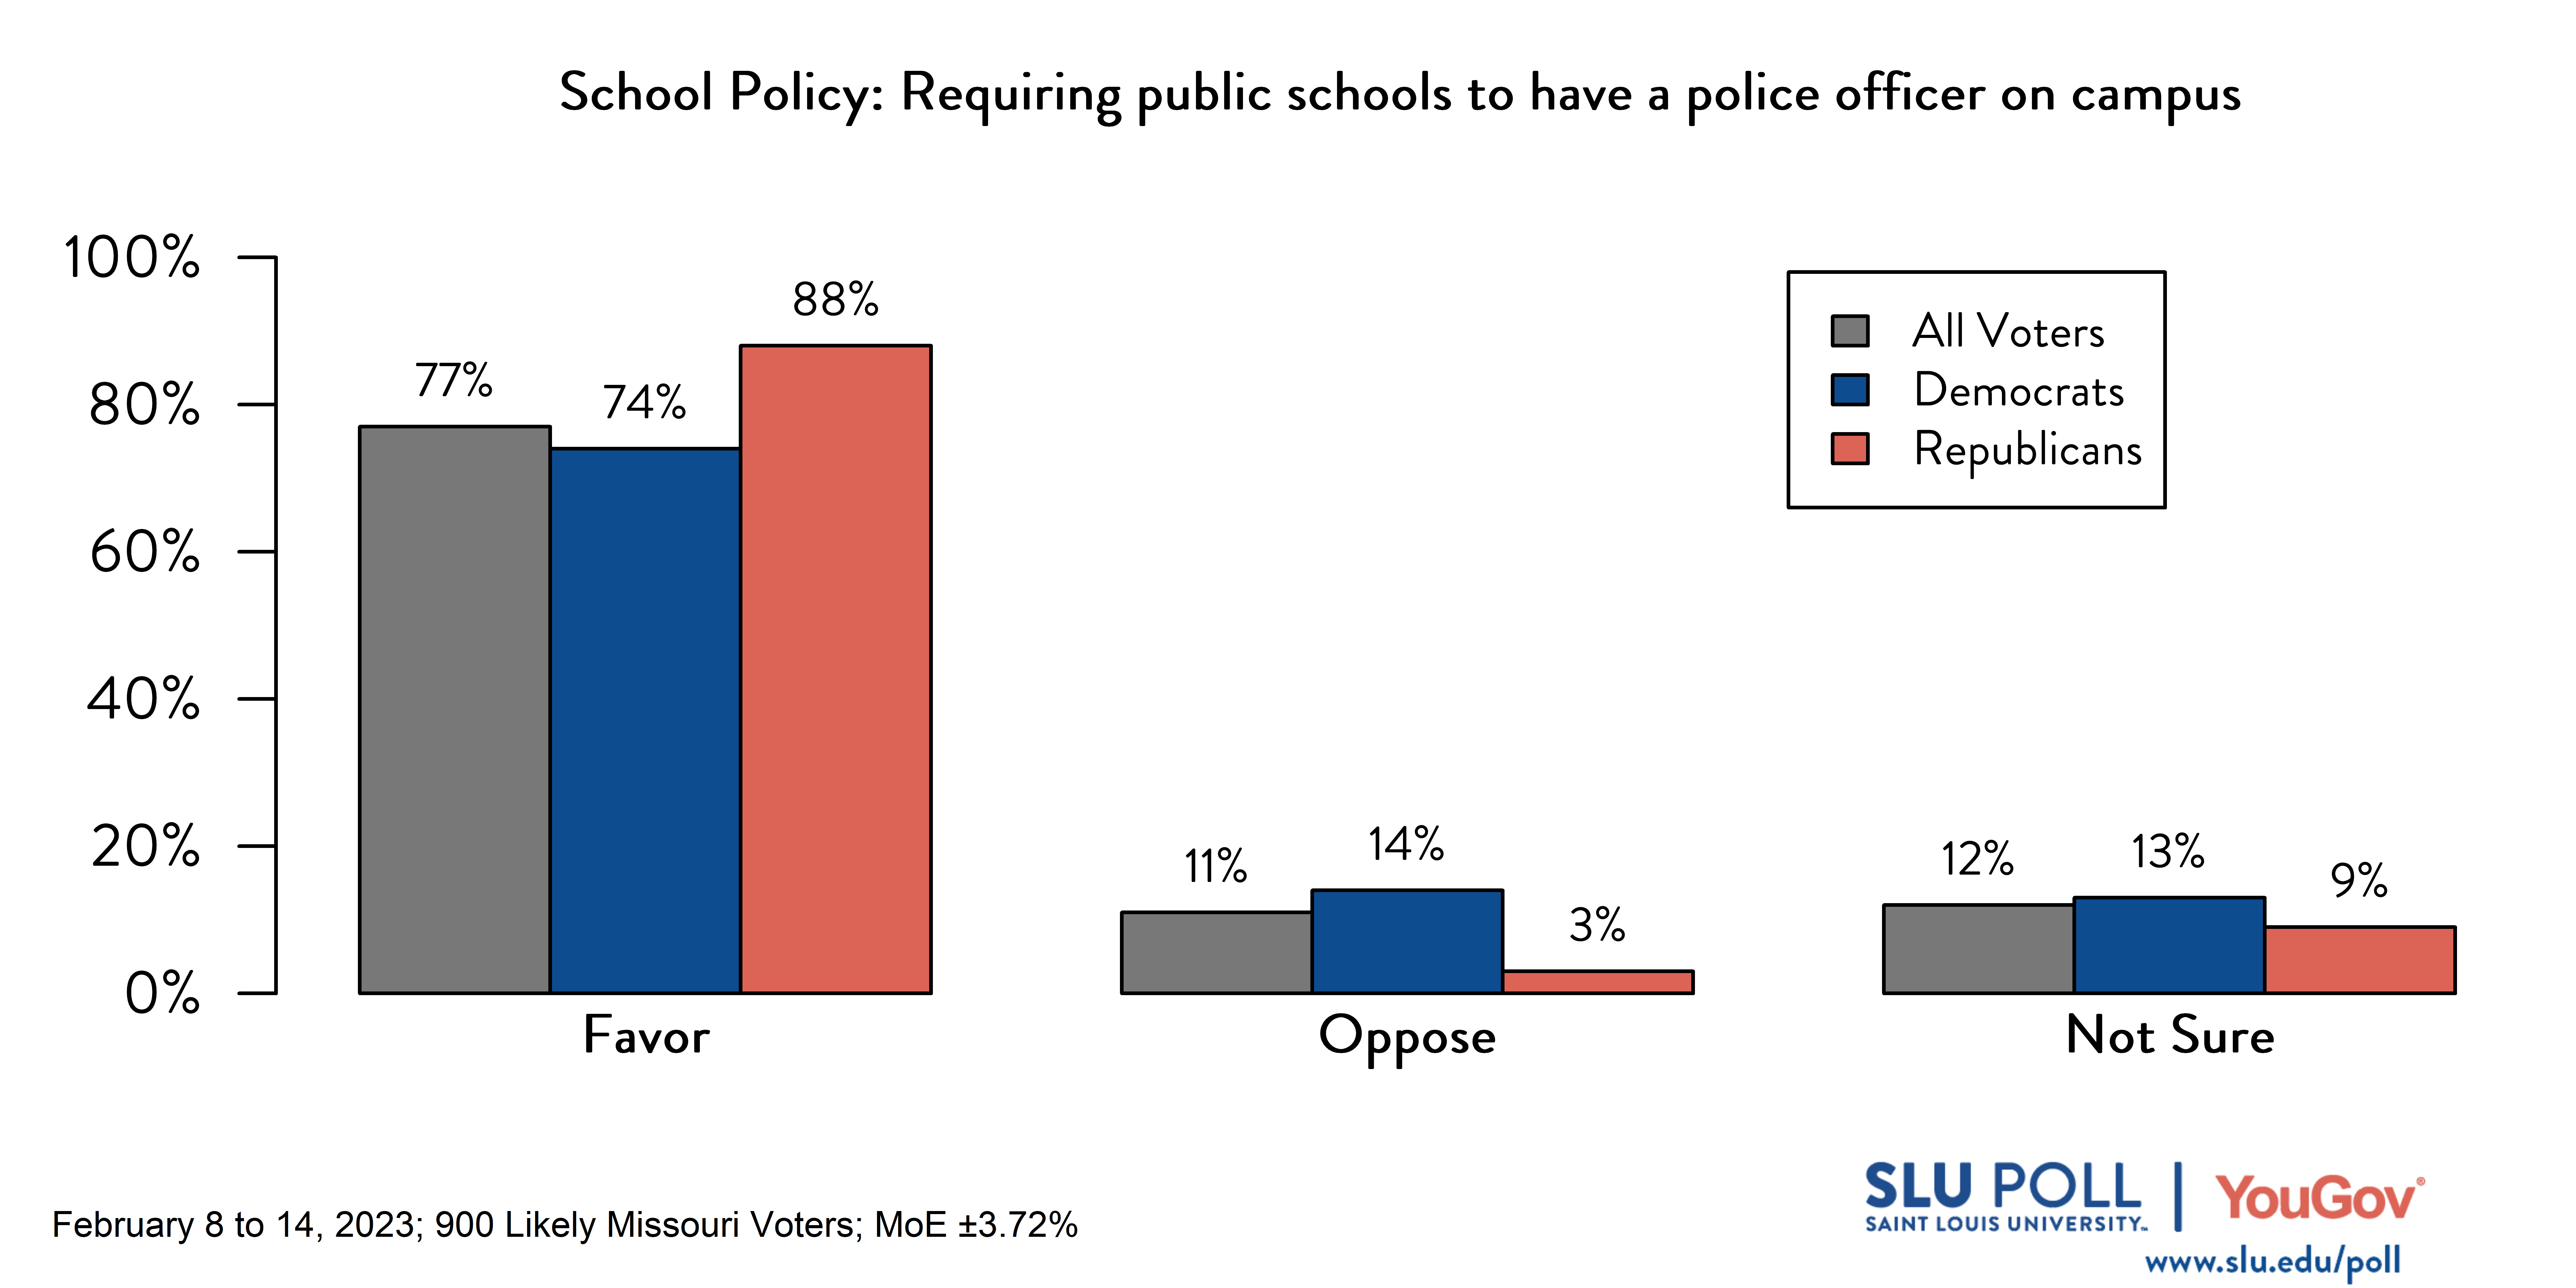 Likely voters' responses to 'Do you favor or oppose the following policies in schools: Requiring public schools to have a police officer on campus (often referred to as school resource officers)?': 77% Favor, 11% Oppose, and 12% Not sure. Democratic voters' responses: ' 74% Favor, 14% Oppose, and 13% Not sure. Republican voters' responses: 88% Favor, 3% Oppose, and 9% Not sure.